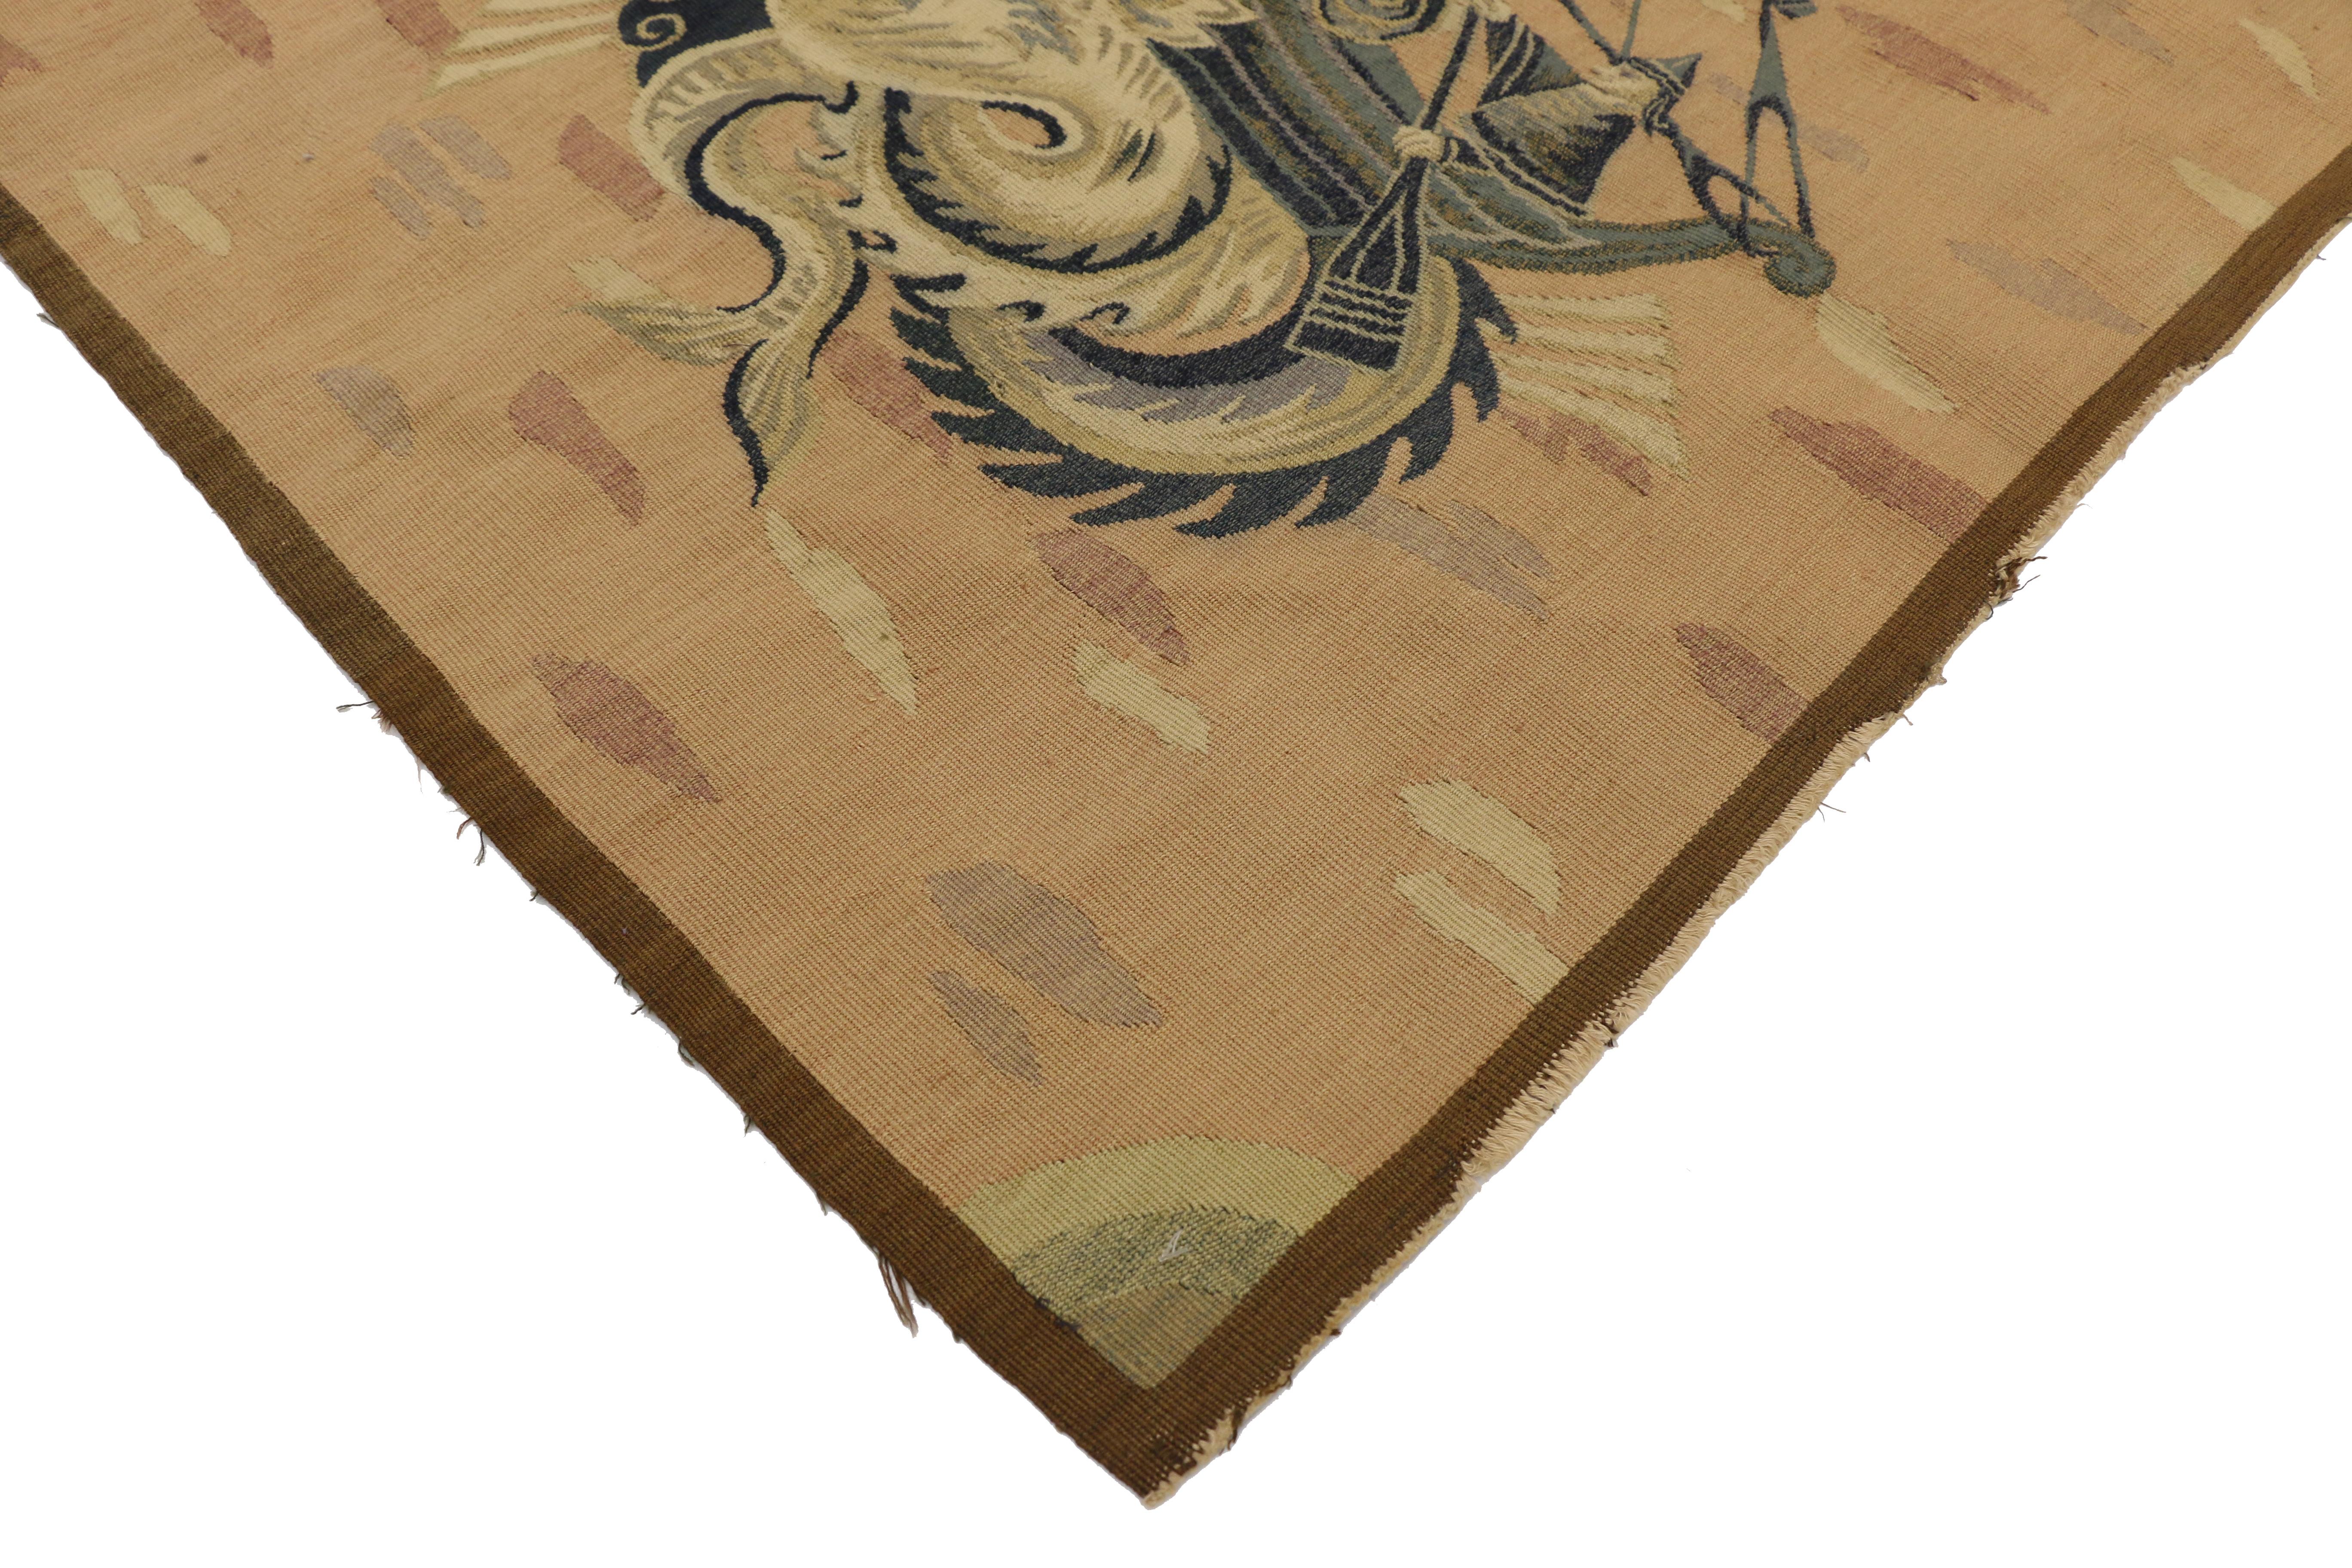 72244, antique French Aubusson tapestry, mythological sea dragon creature wall hanging. Drawing inspiration from Hippocampus and Nereids, this handwoven wool antique French Aubusson tapestry embodies a true Greek Mythical scene and Louis XIV style.